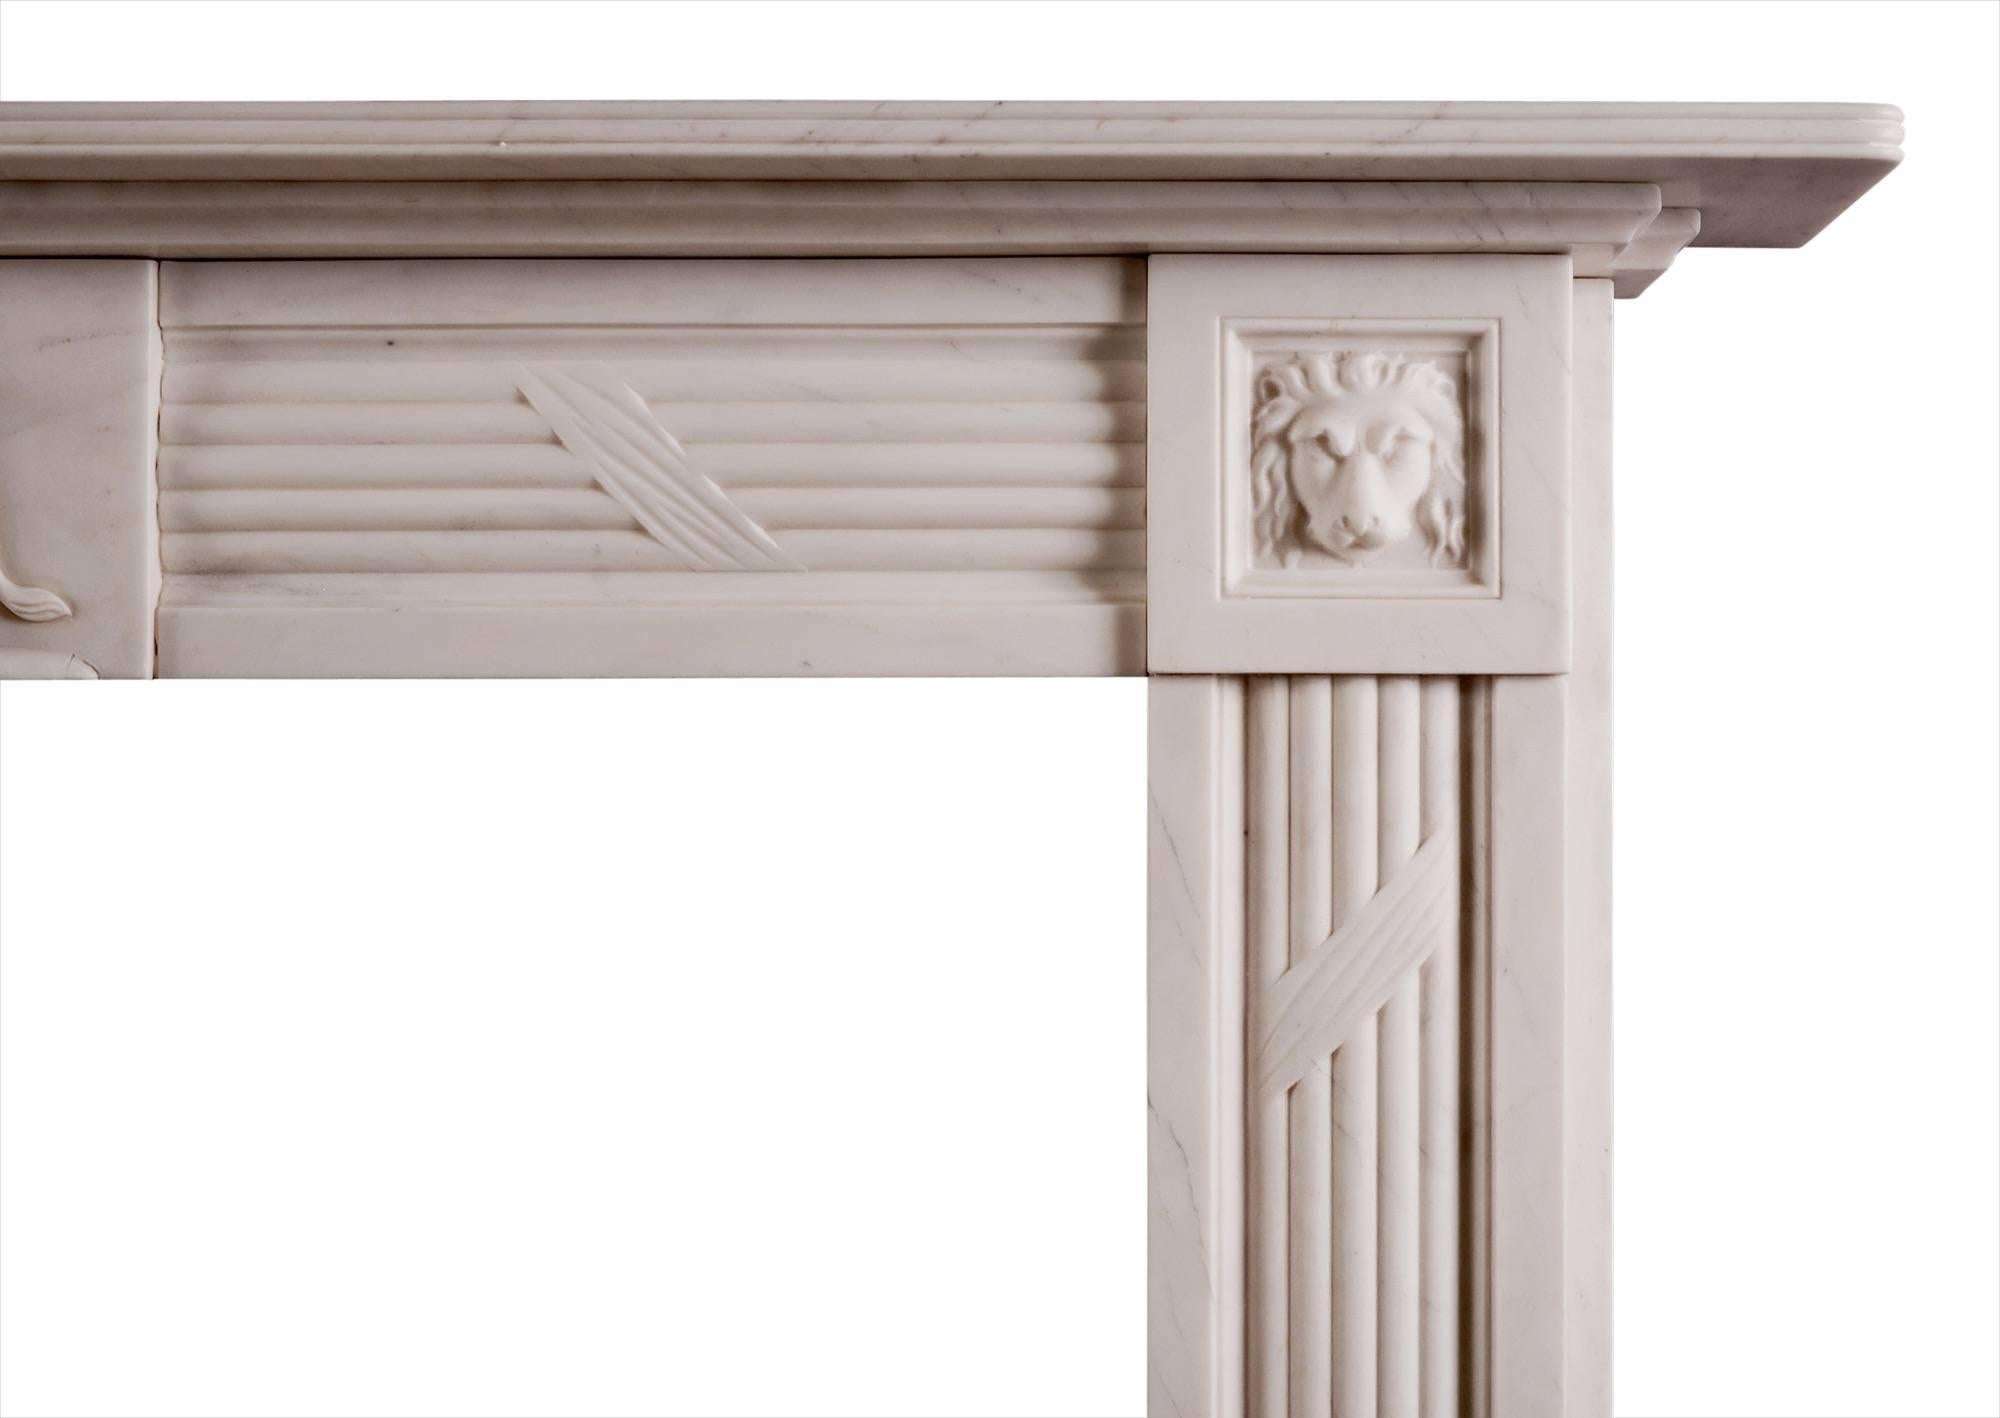 A Regency style white marble fireplace with reeded and ribboned frieze and jambs. The carved centre panel depicting a scene of Androcles and the lion, with associated lions heads to side blockings. Reeded shelf. A copy of an early 19th century